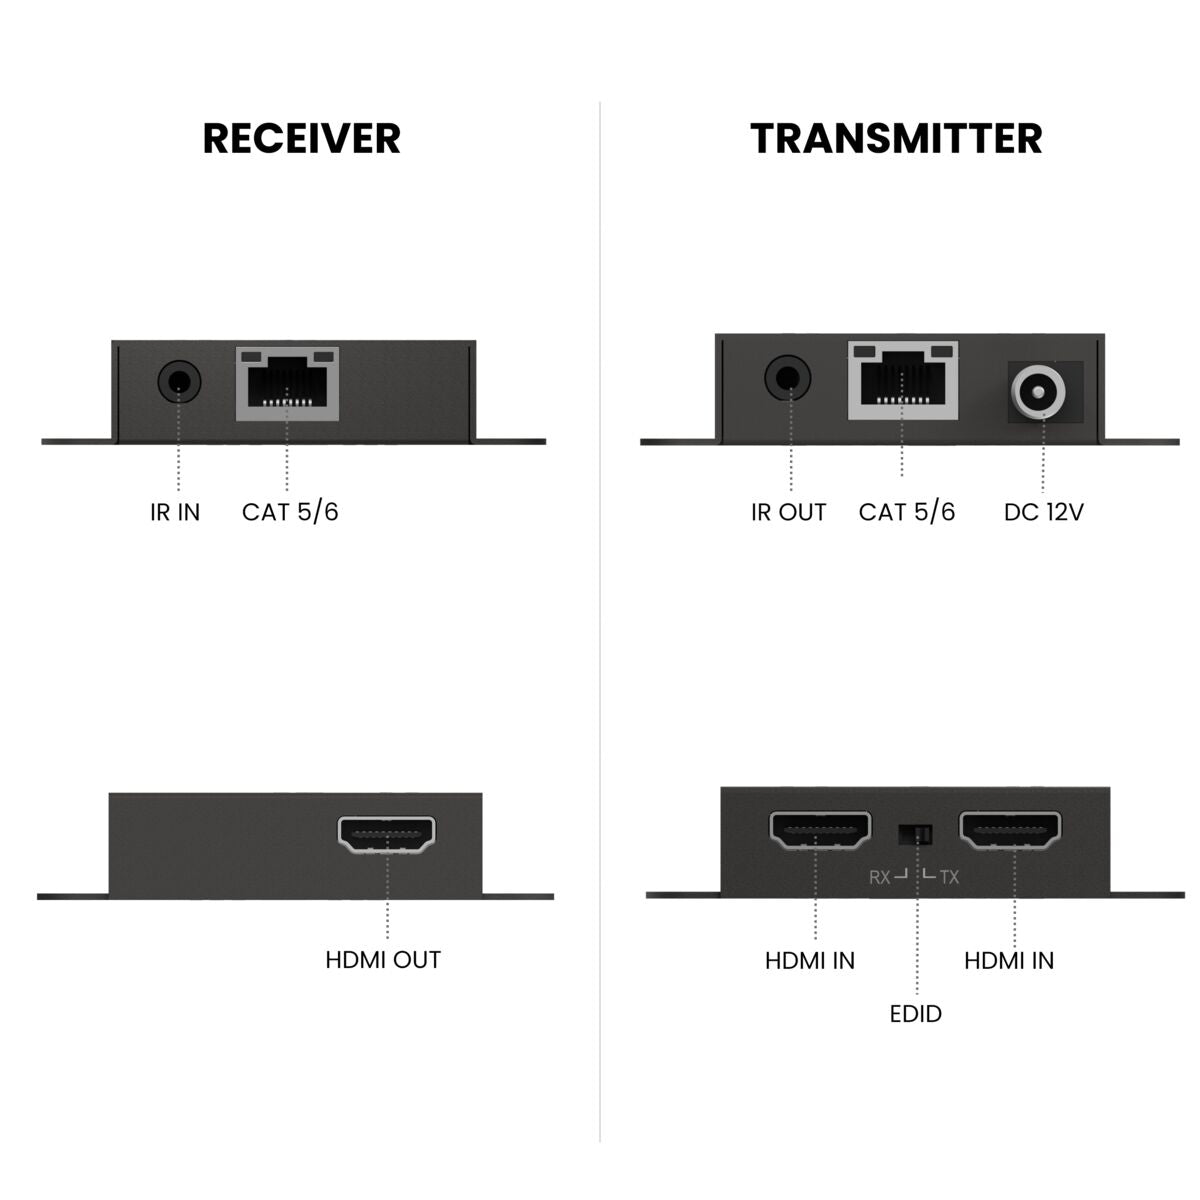 MegaView 67 Pro - HDMI Extender UTP - Back View Image Connections Transmitter and Receiver | Marmitek